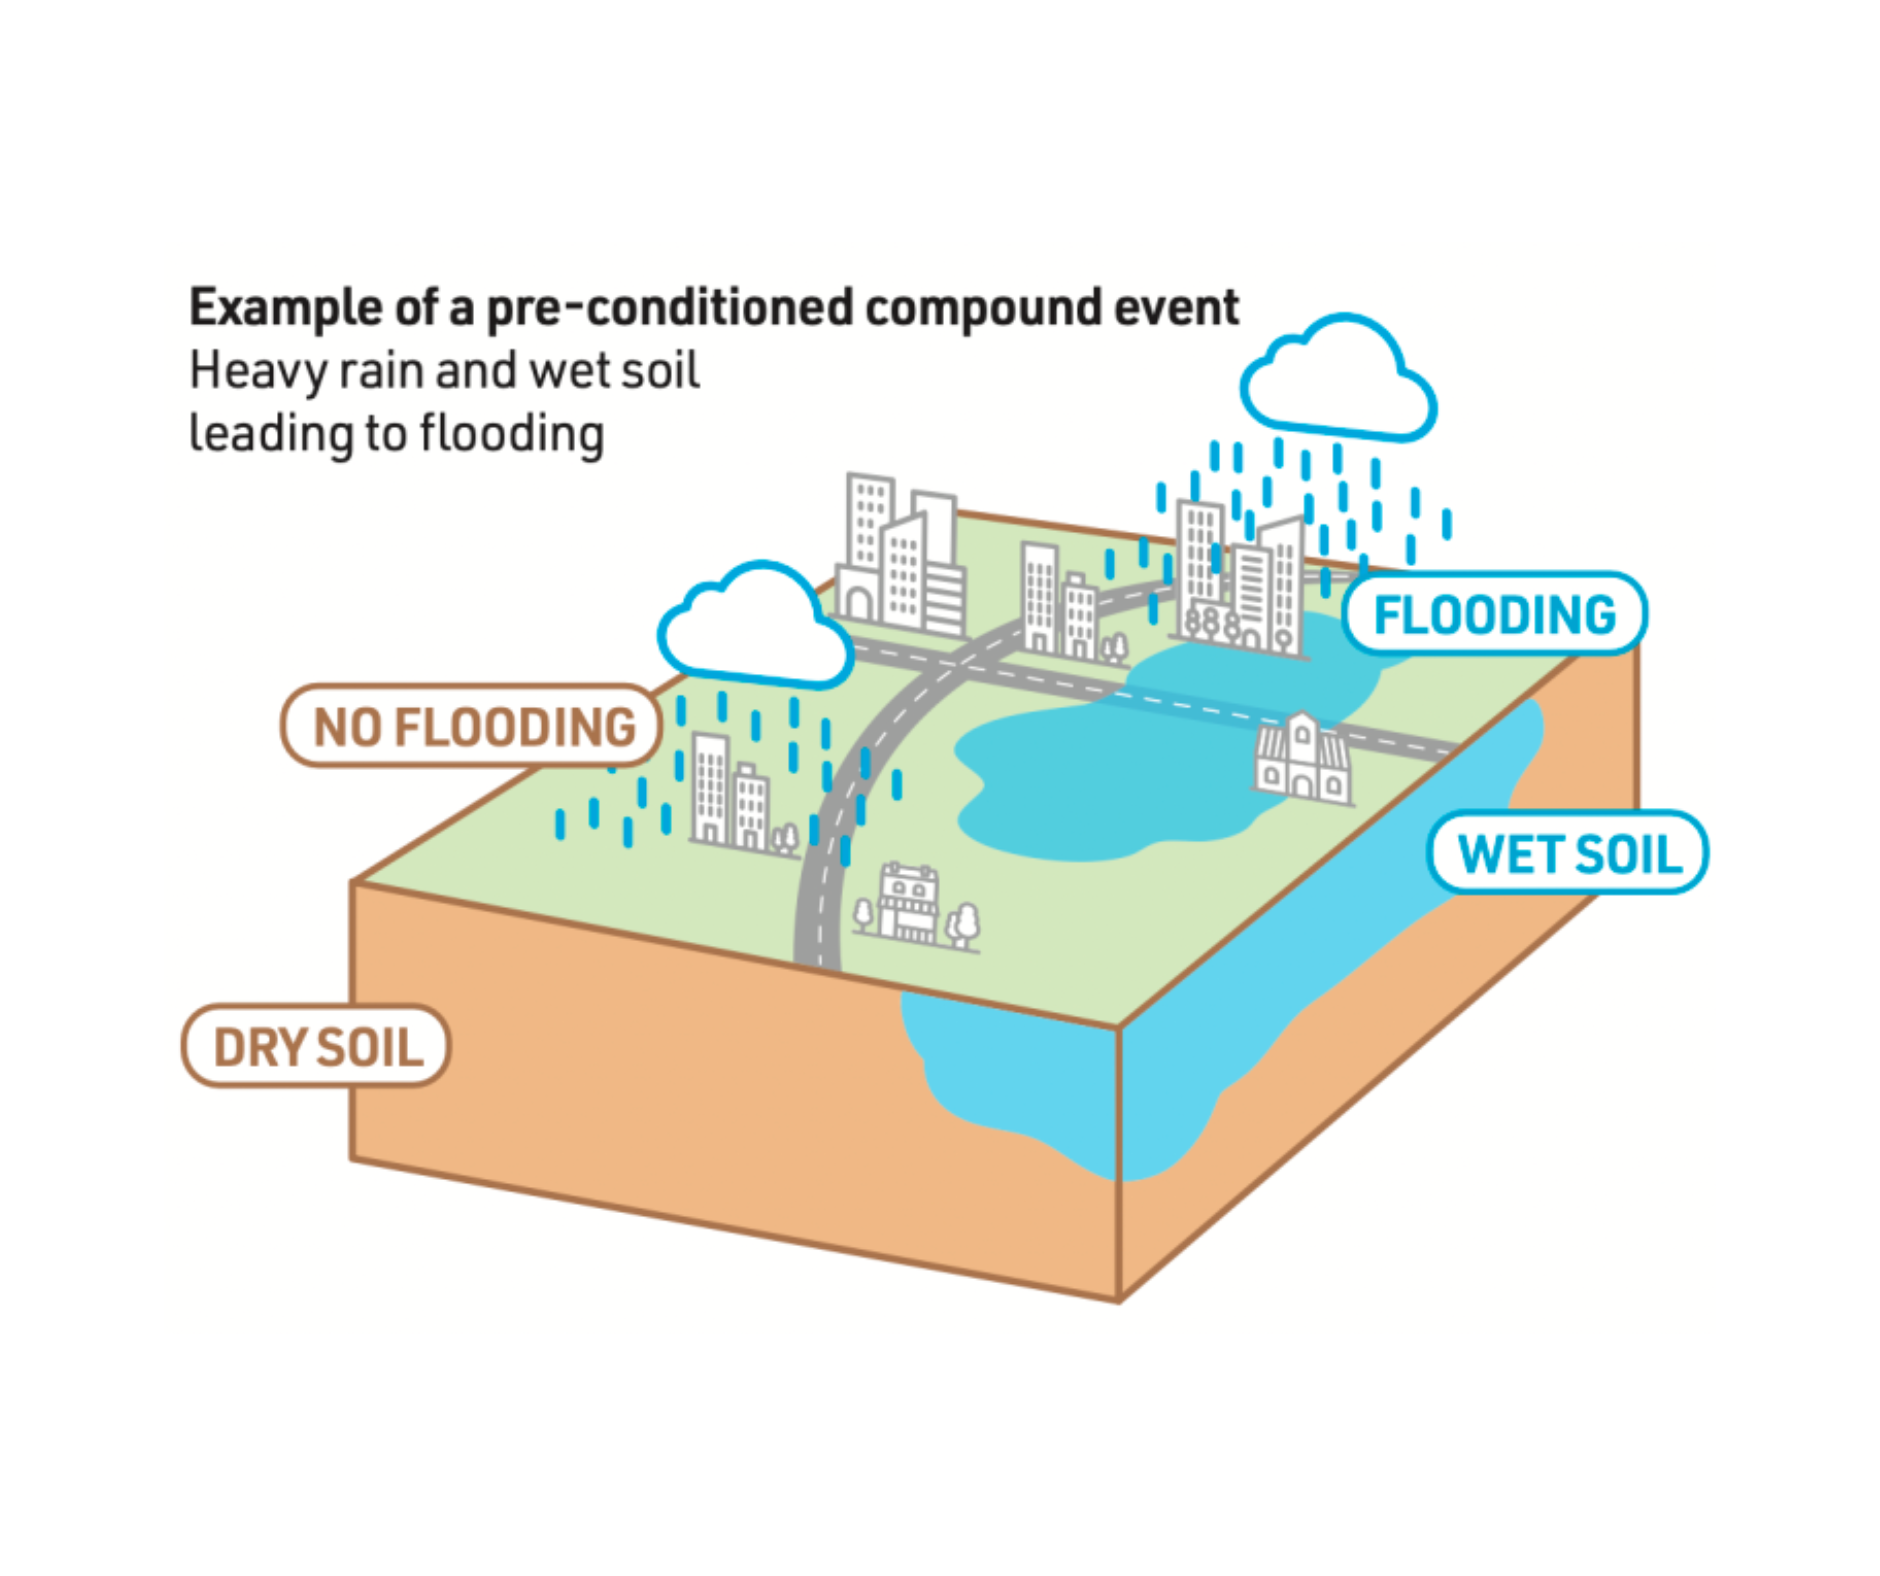 What is a pre-conditioned compound event in weather and climate?